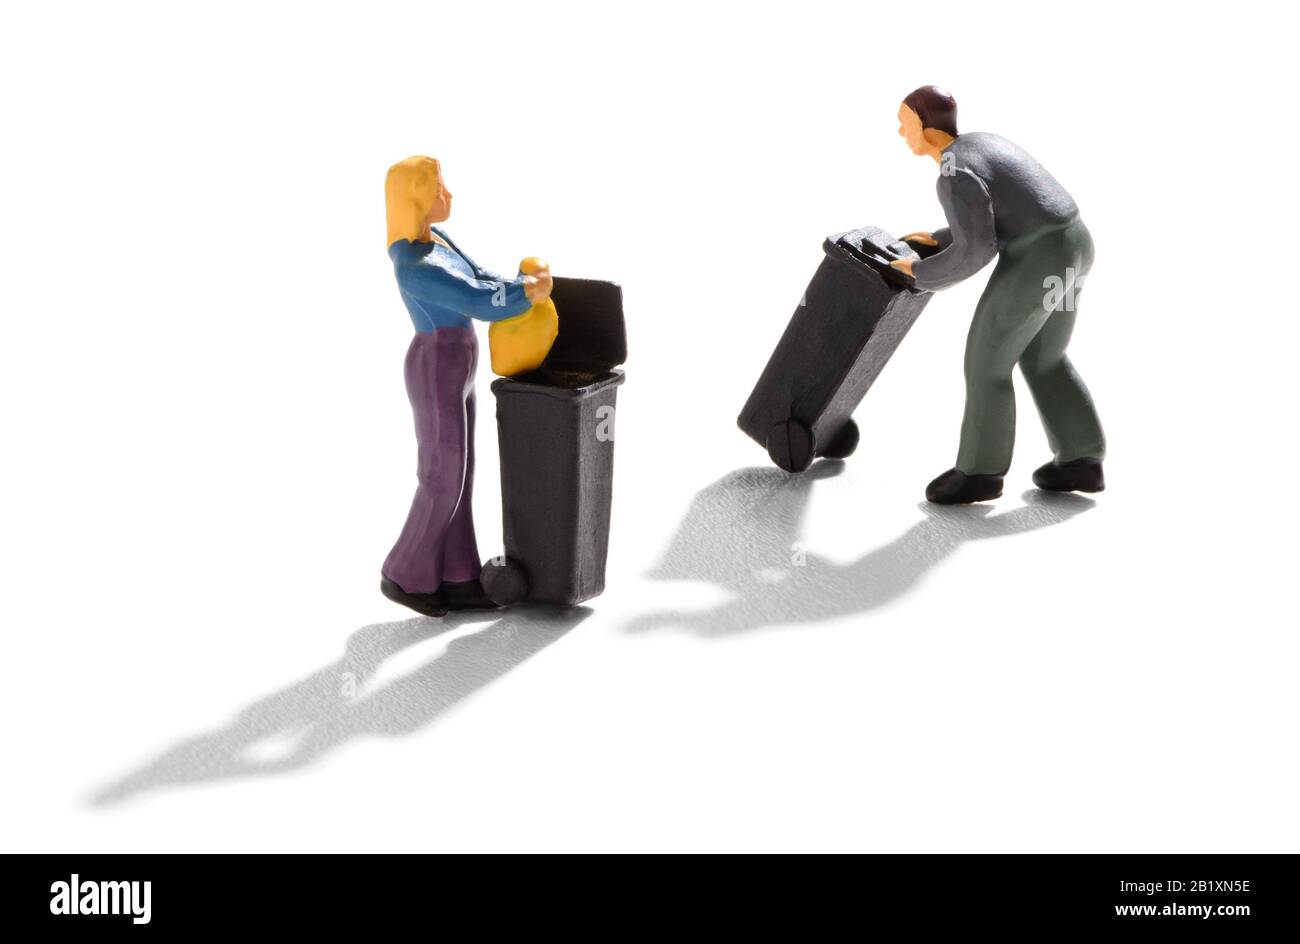 Two miniature people using rubbish bins with a housewife putting out a bag of waste and a garbage man wheeling one along over white with shadow Stock Photo